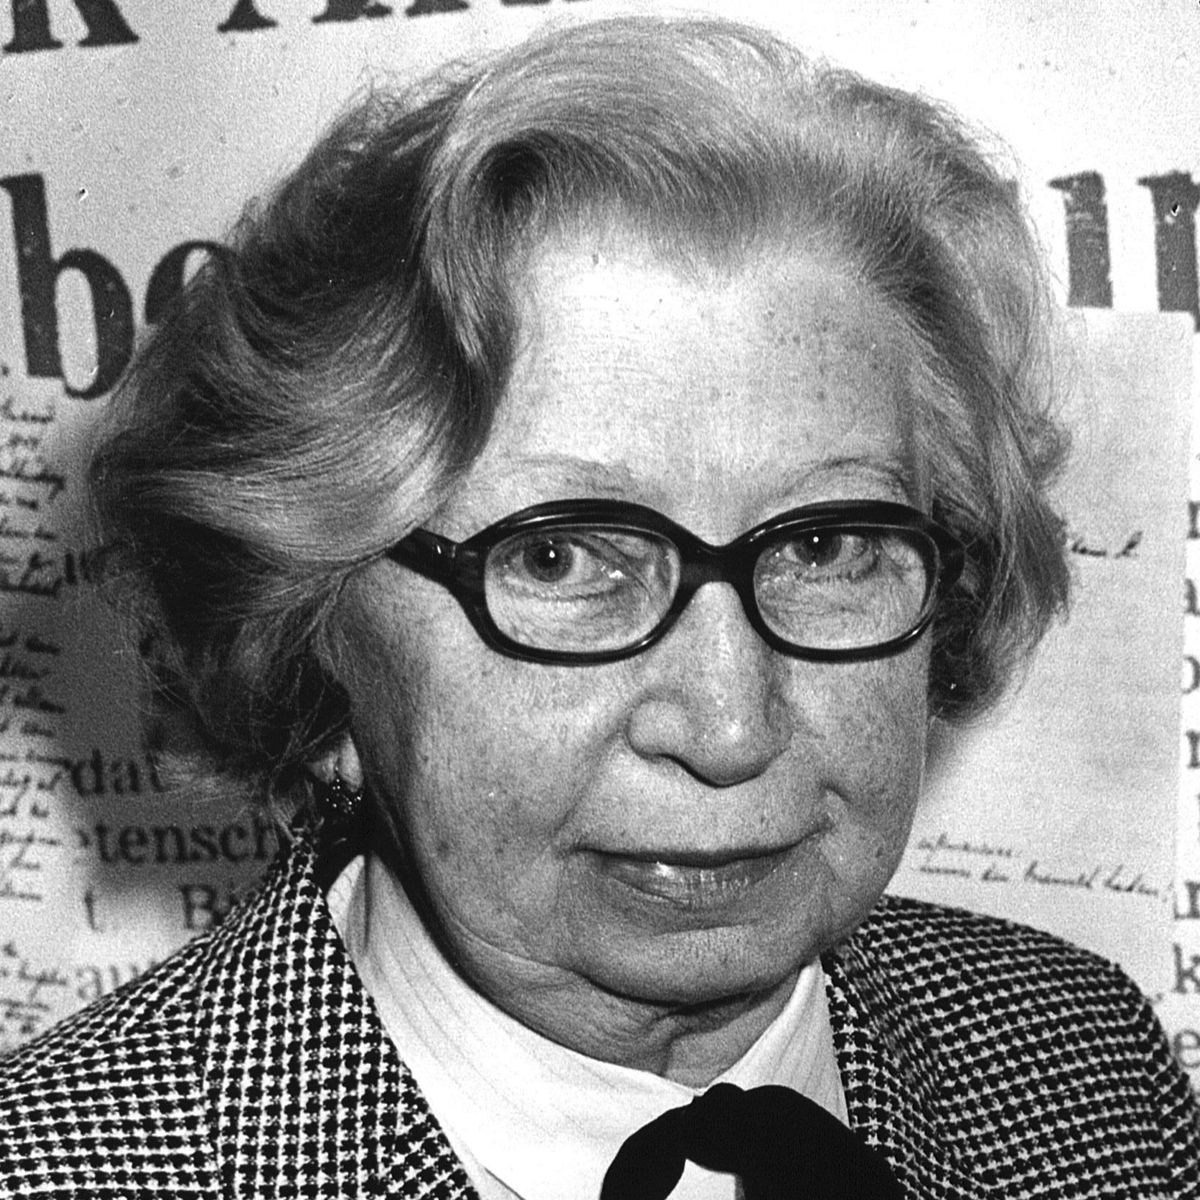 epa01986514 (FILES) A file photo dated 3 June 1986 of Miep Gies  holding the original Diary of Anne Frank.  Giess, the office secretary who defied the Nazi occupiers to hide Anne Frank and her family for two years and saved the teenager's diary, died 11 January 2010, aged 100.  EPA/STF